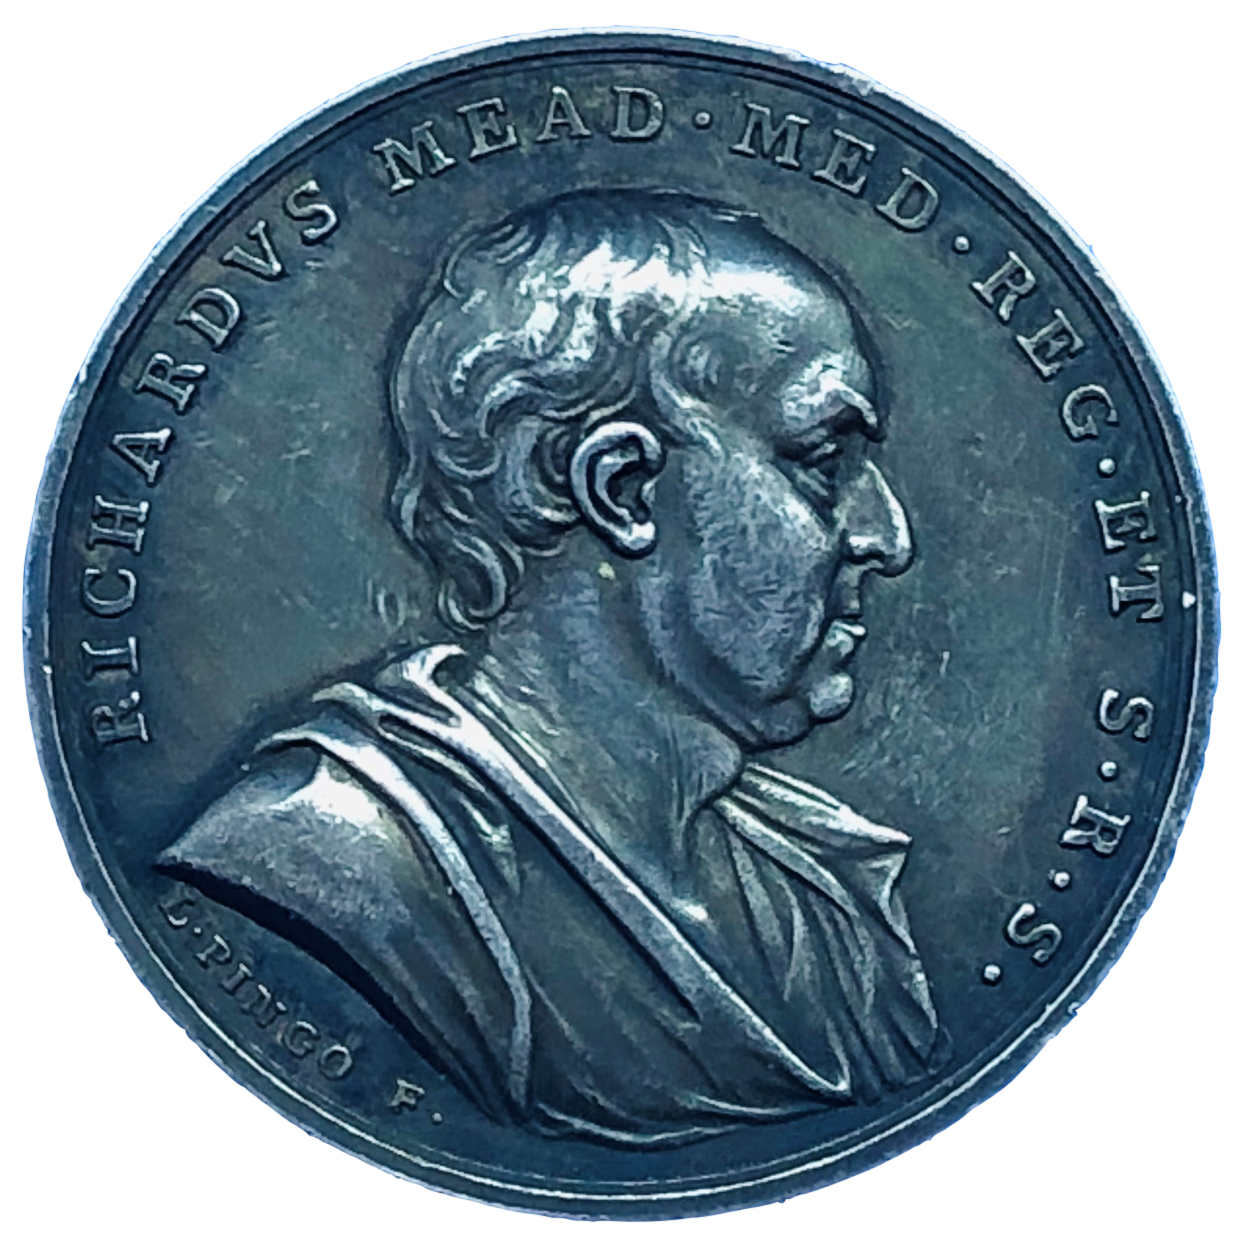 1754 Richard Mead Memorial Historical Medallion by L Pingo Obverse